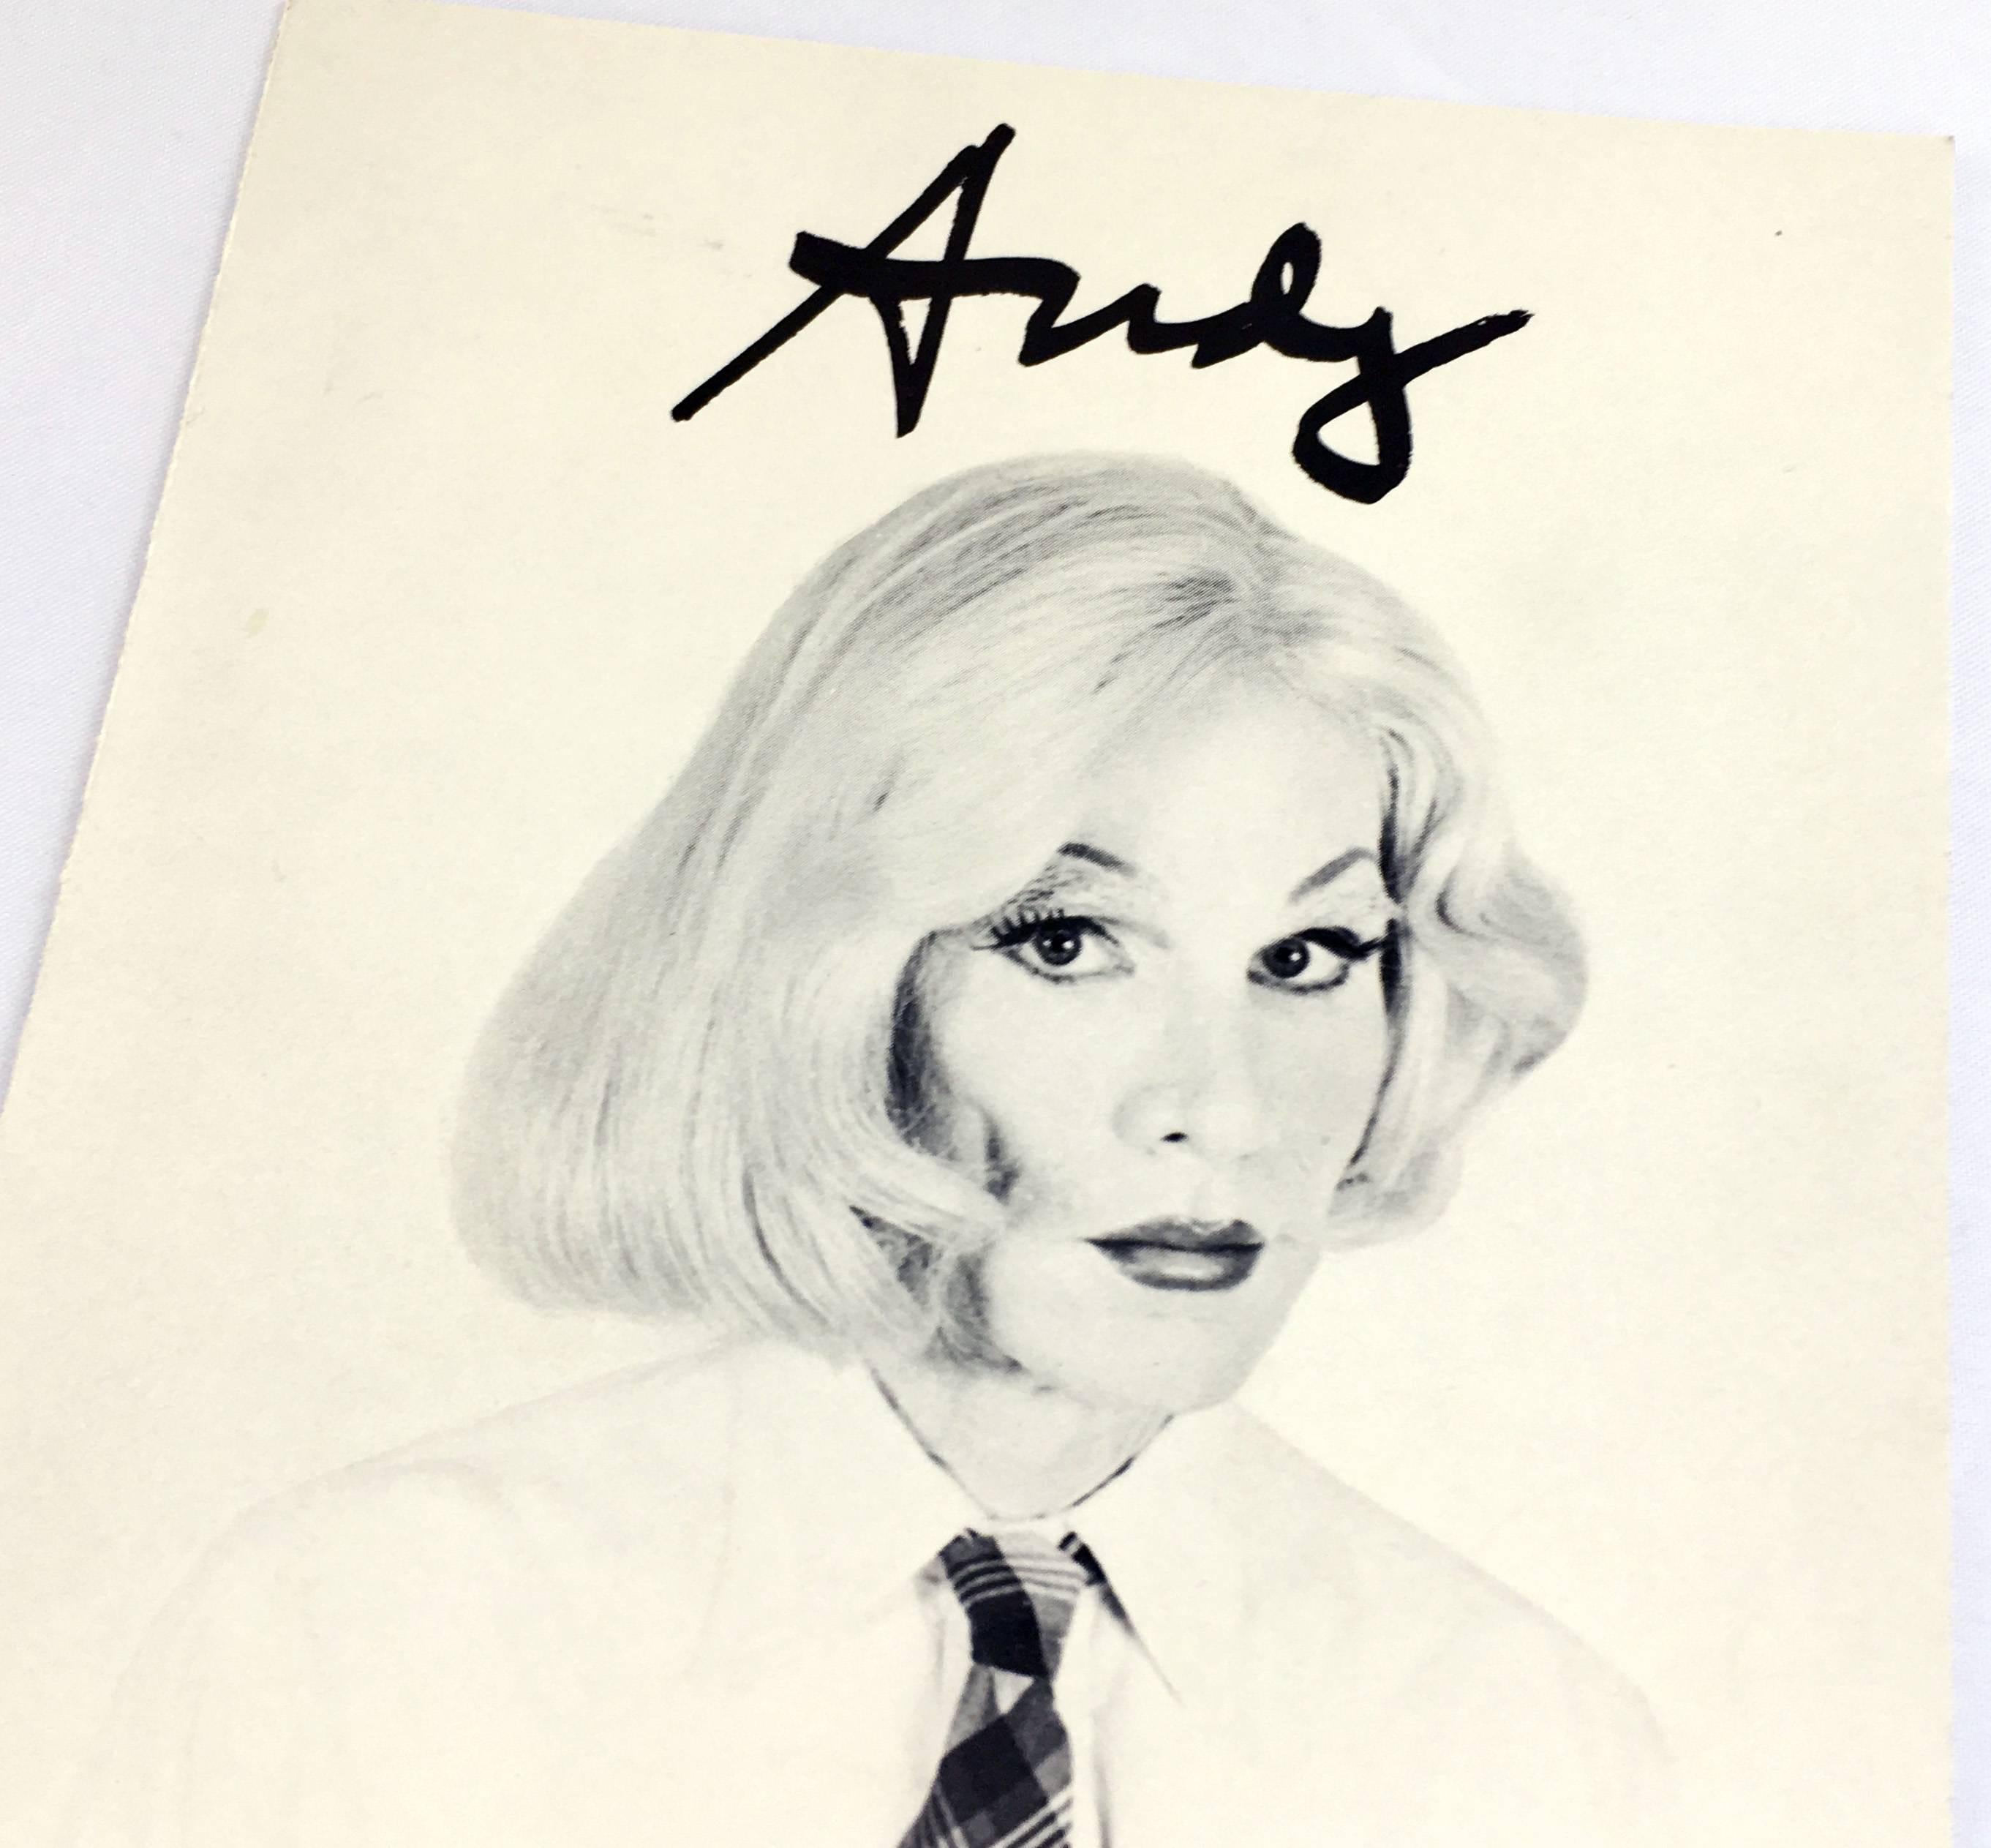 Andy Warhol In Drag (vintage Warhol announcement)  - Photograph by Christopher Makos